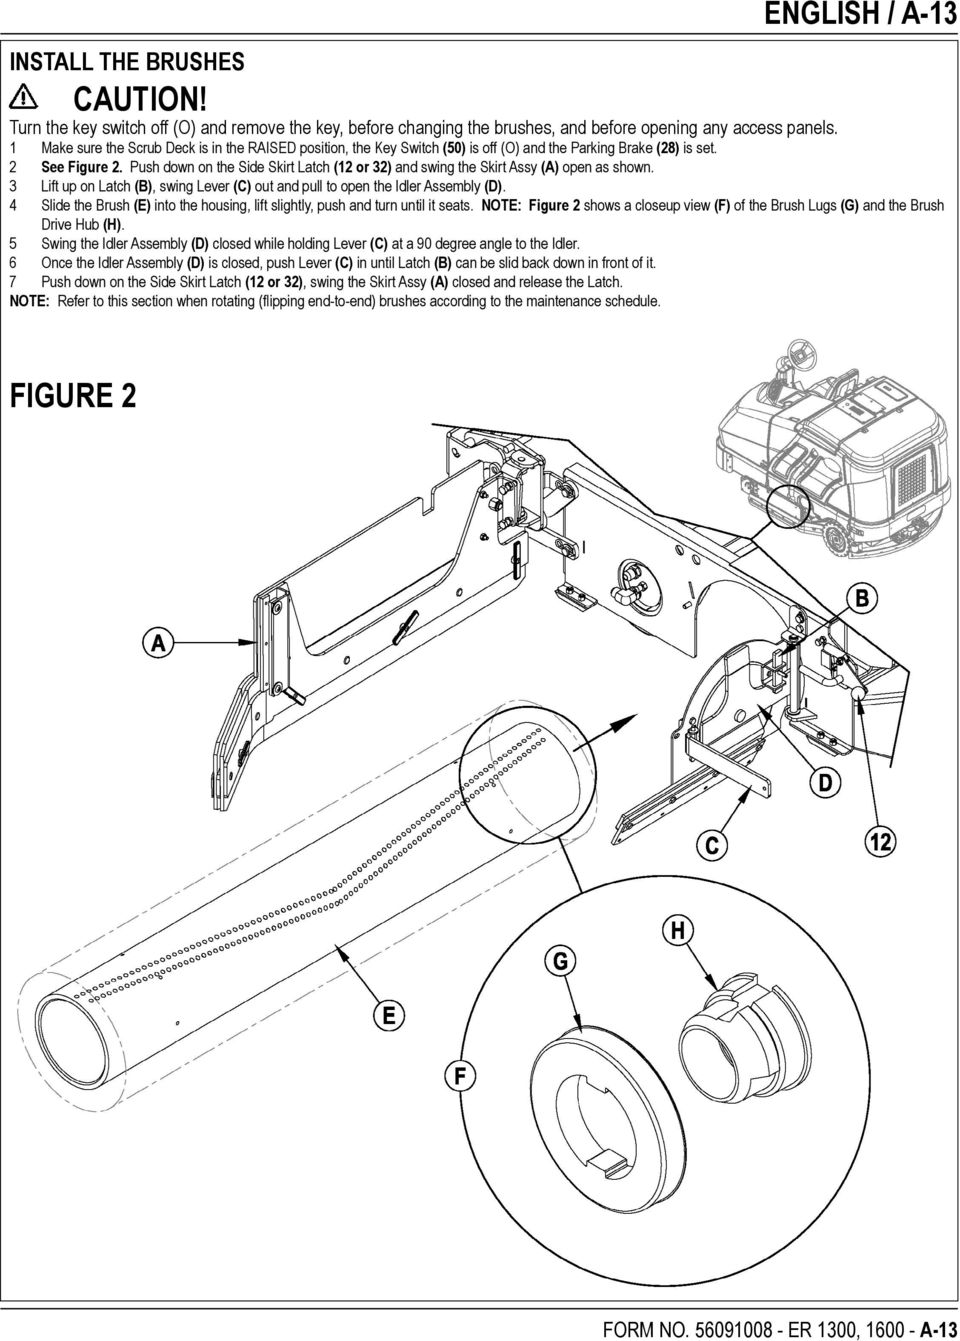 Push down on the Side Skirt Latch (12 or 32) and swing the Skirt Assy (A) open as shown. 3 Lift up on Latch (B), swing Lever (C) out and pull to open the Idler Assembly (D).